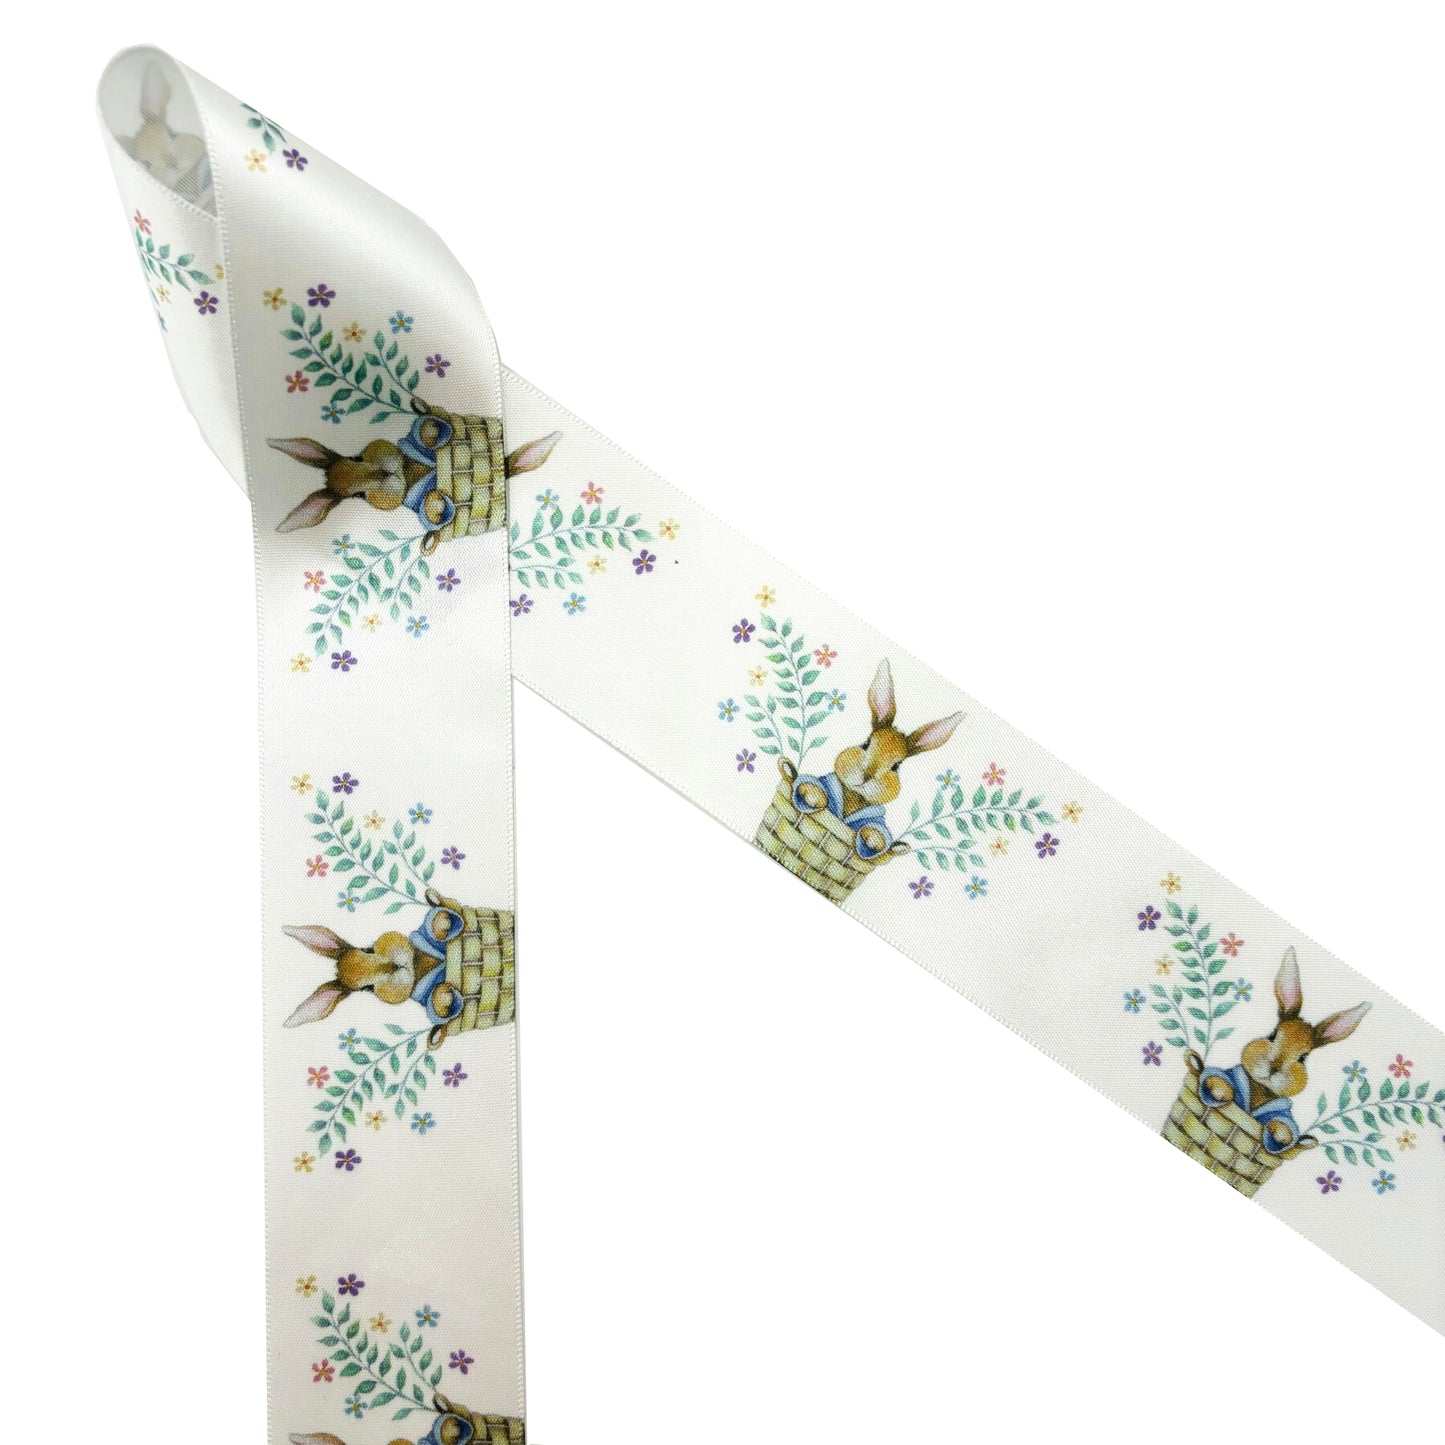 Bunny ribbon Easter bunny pops out of a basket with sprigs of Spring flowers printed on 1.5" white satin and grosgrain